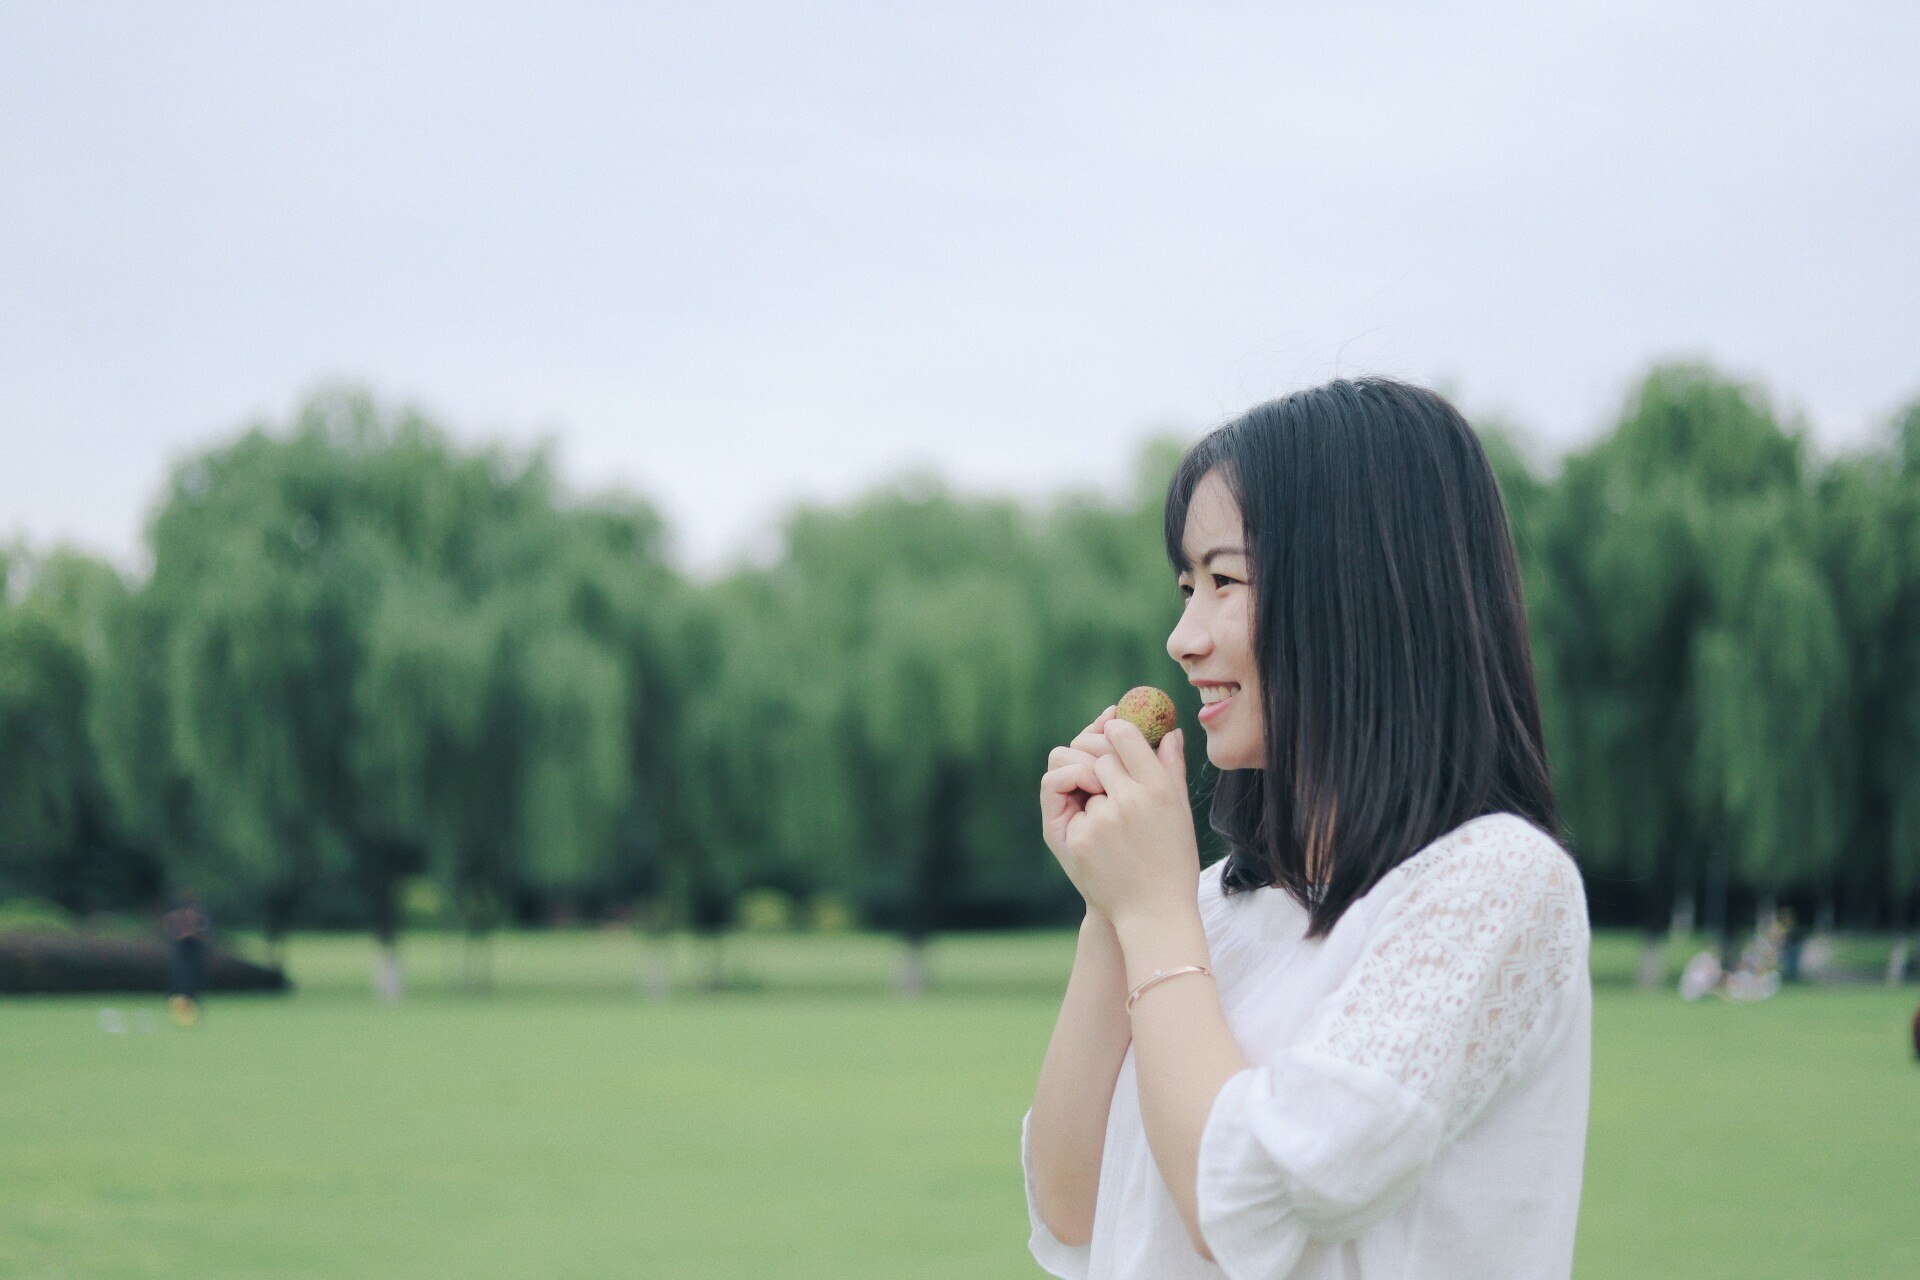 Marry A Dating Chinese Women – Pros and Cons About Marrying